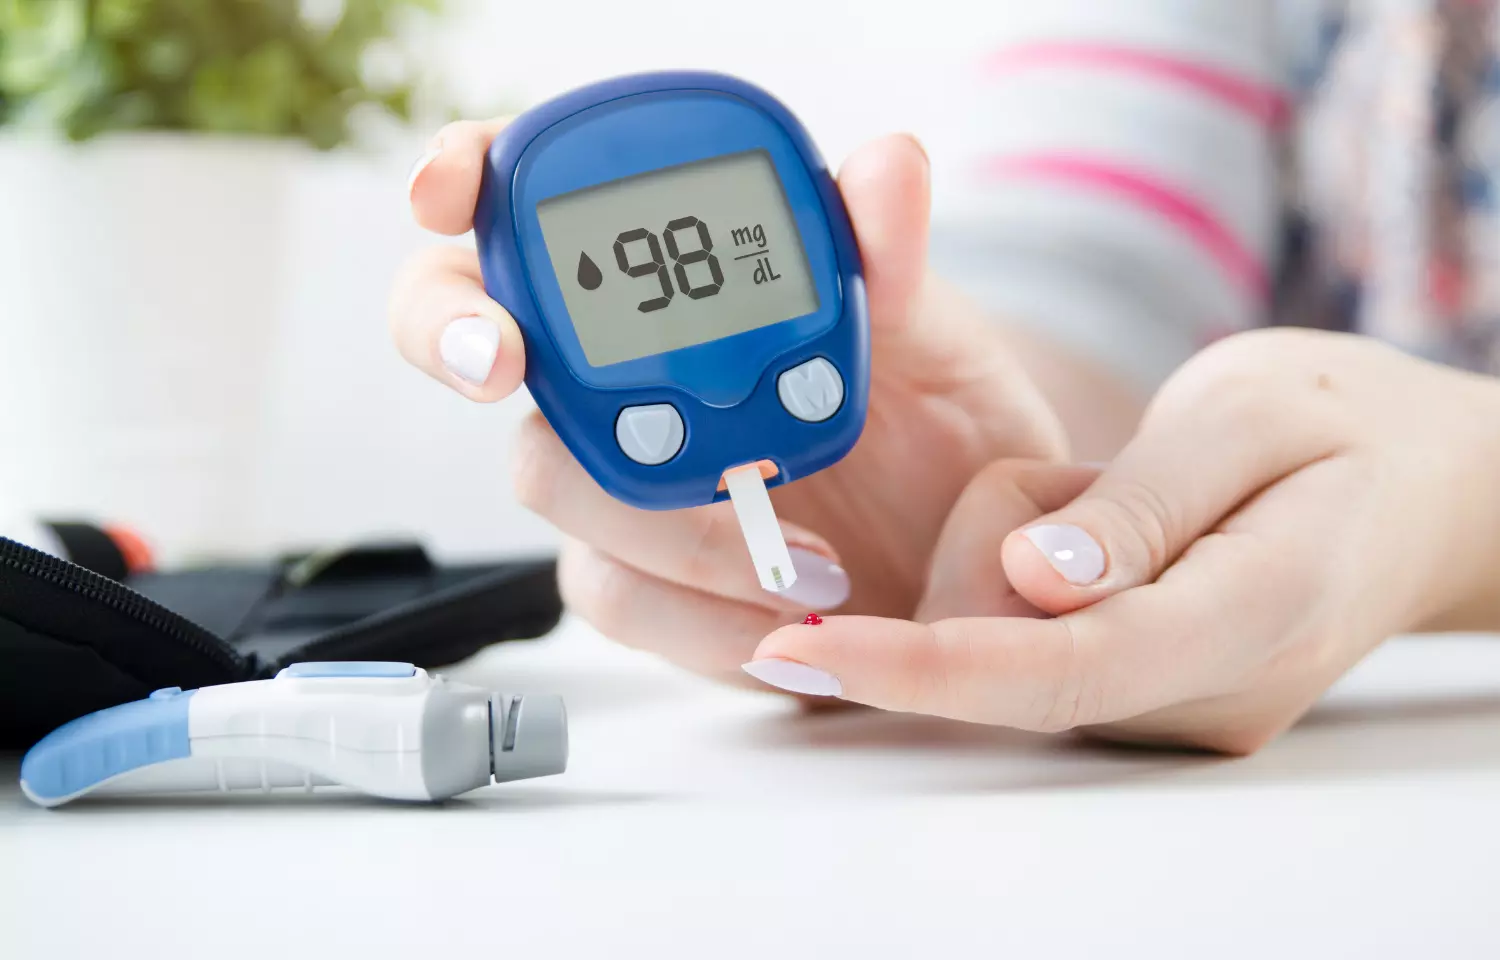 Dulaglutide improves blood sugar control in young people with type 2 diabetes: Study